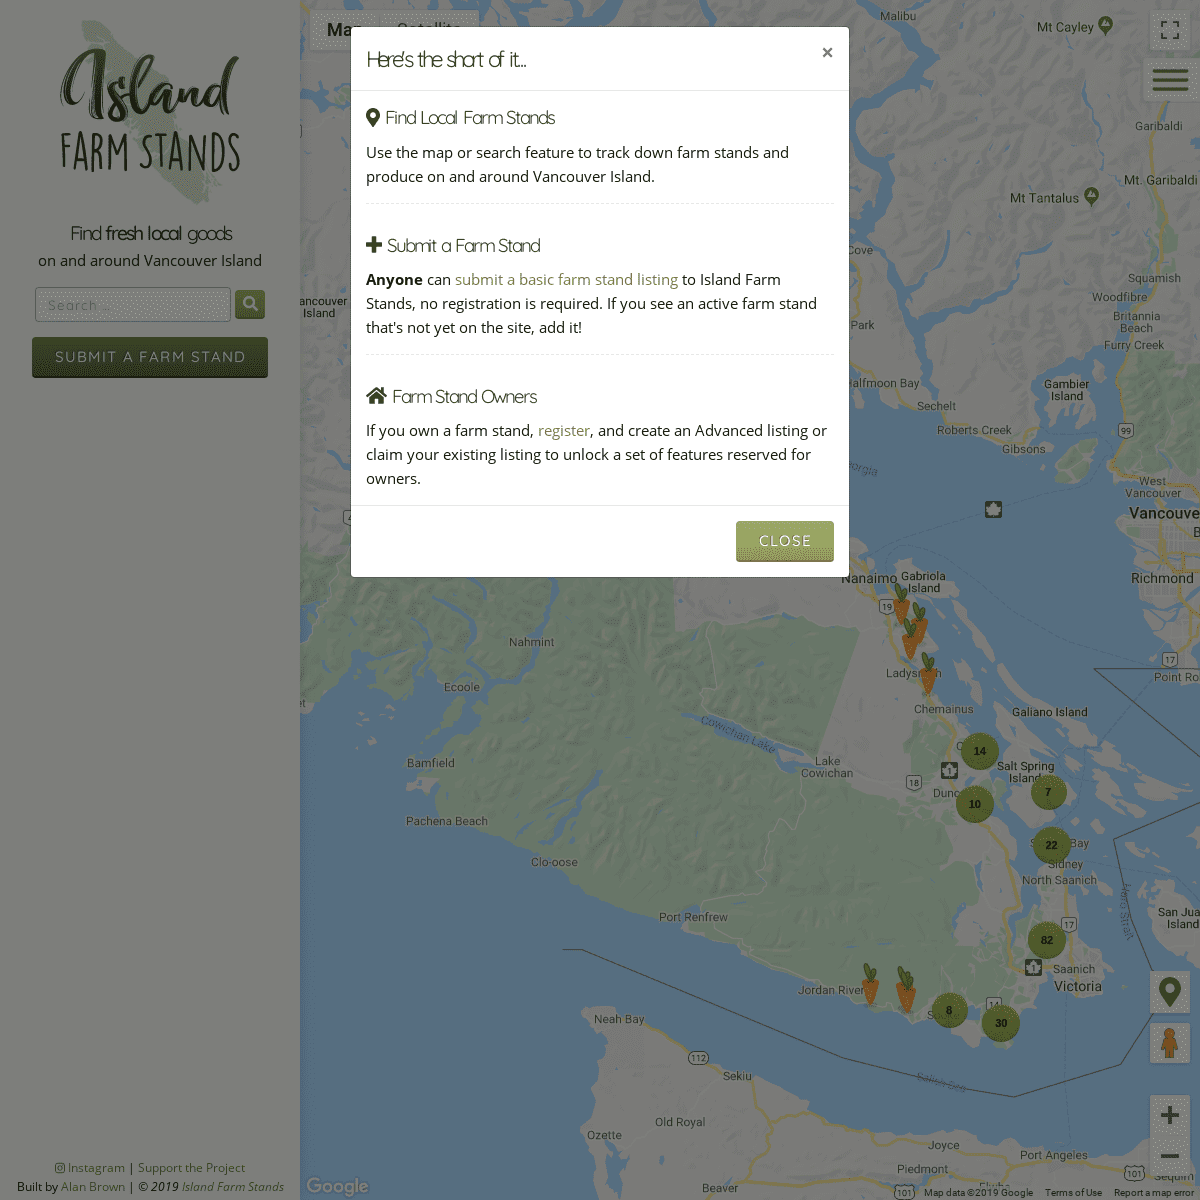 Island Farm Stands - Find fresh local goods around Vancouver Island